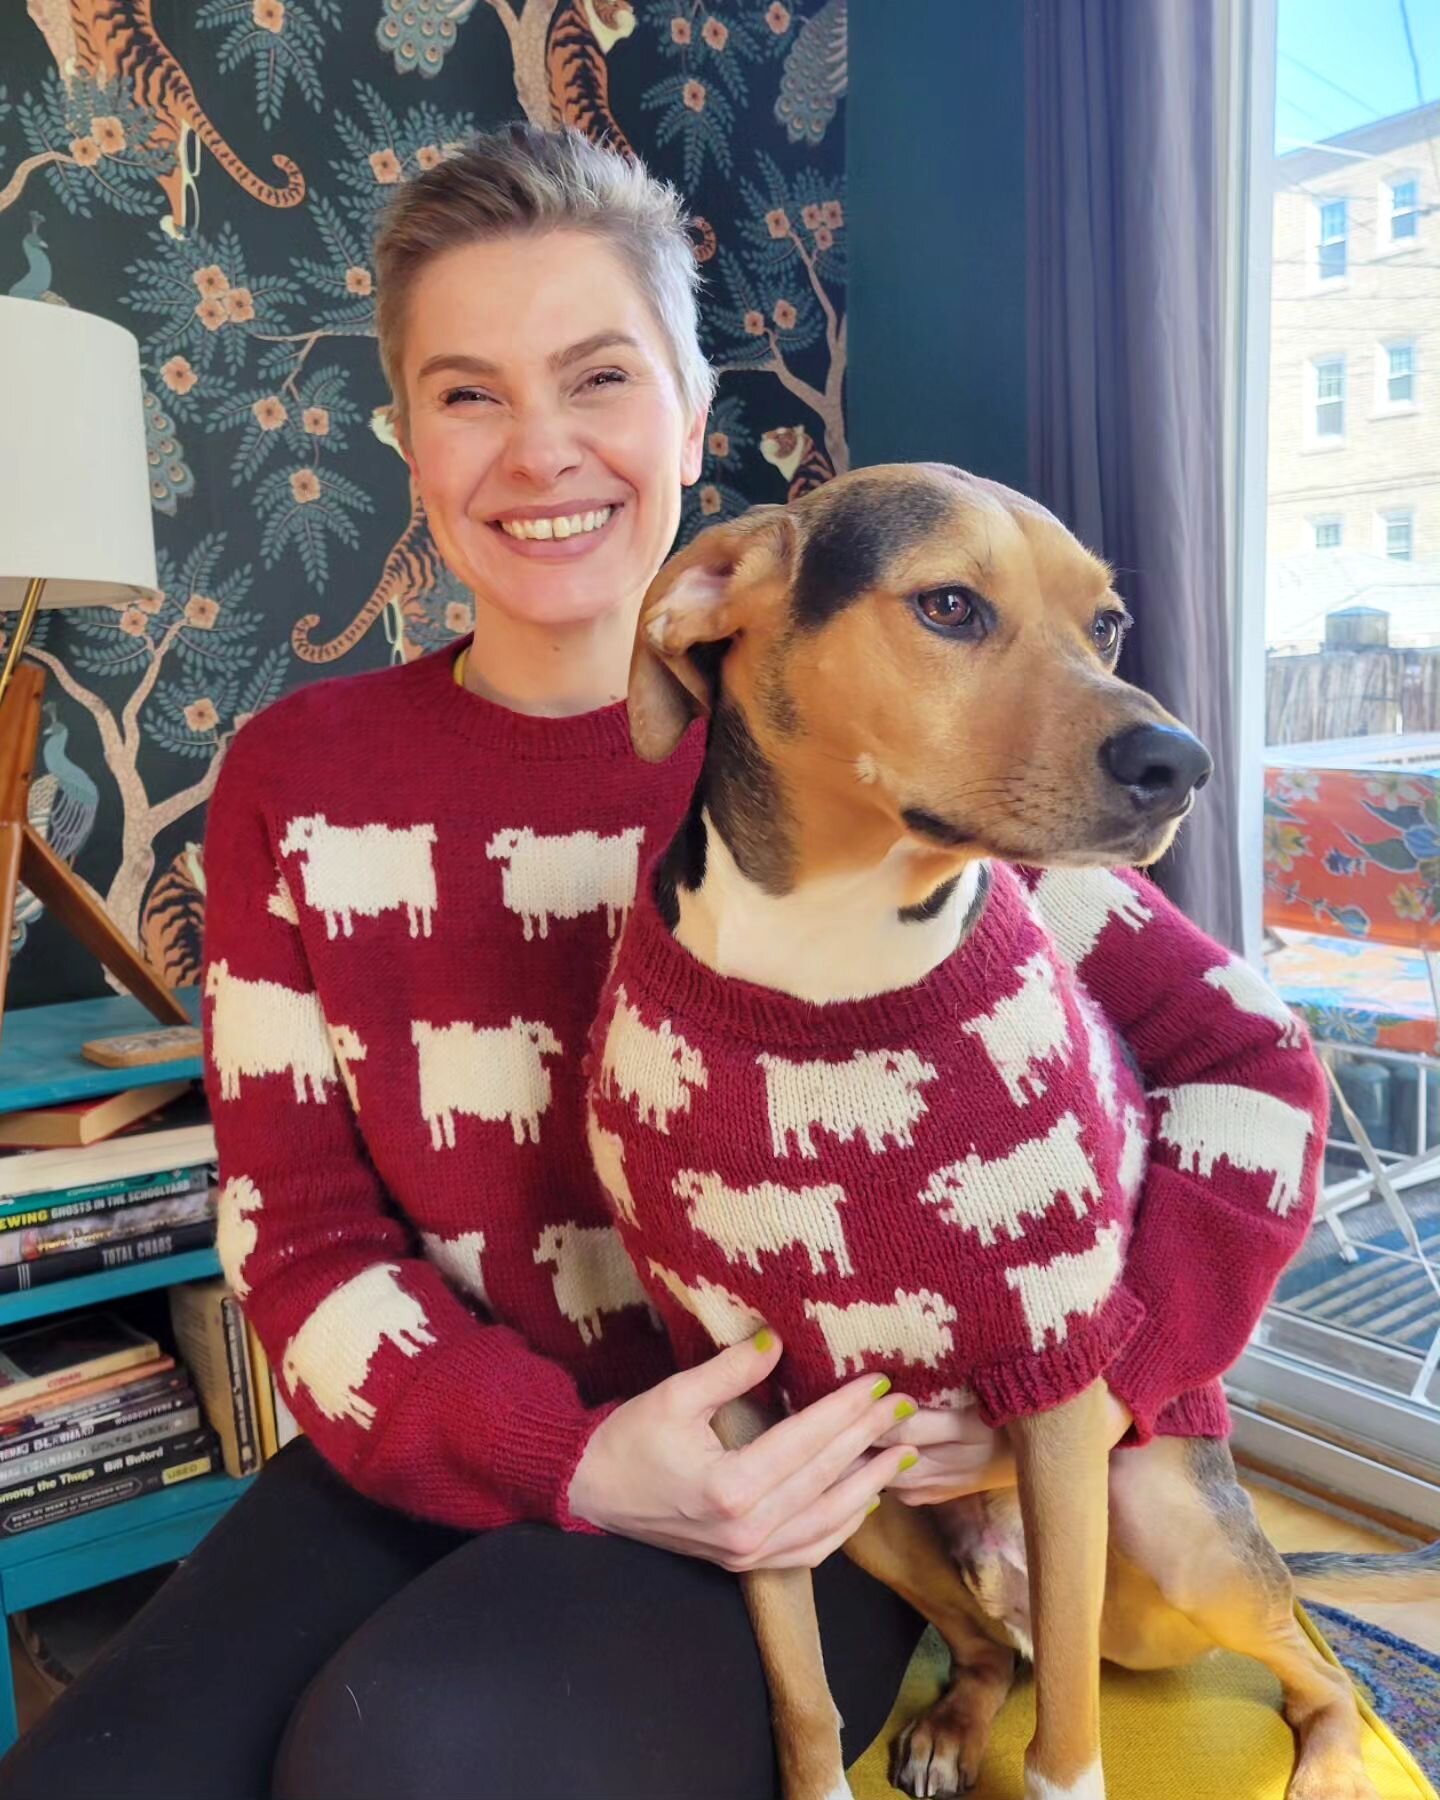 When you gotta twin!

But swipe for the real struggle! 

Wearing my Black Sheep Sweater today and after teaching my Design Your Own Dog Sweater I realized I never got this perfect twinning pic! Rectified. 

I'll be launching another Black Sheep Sweat